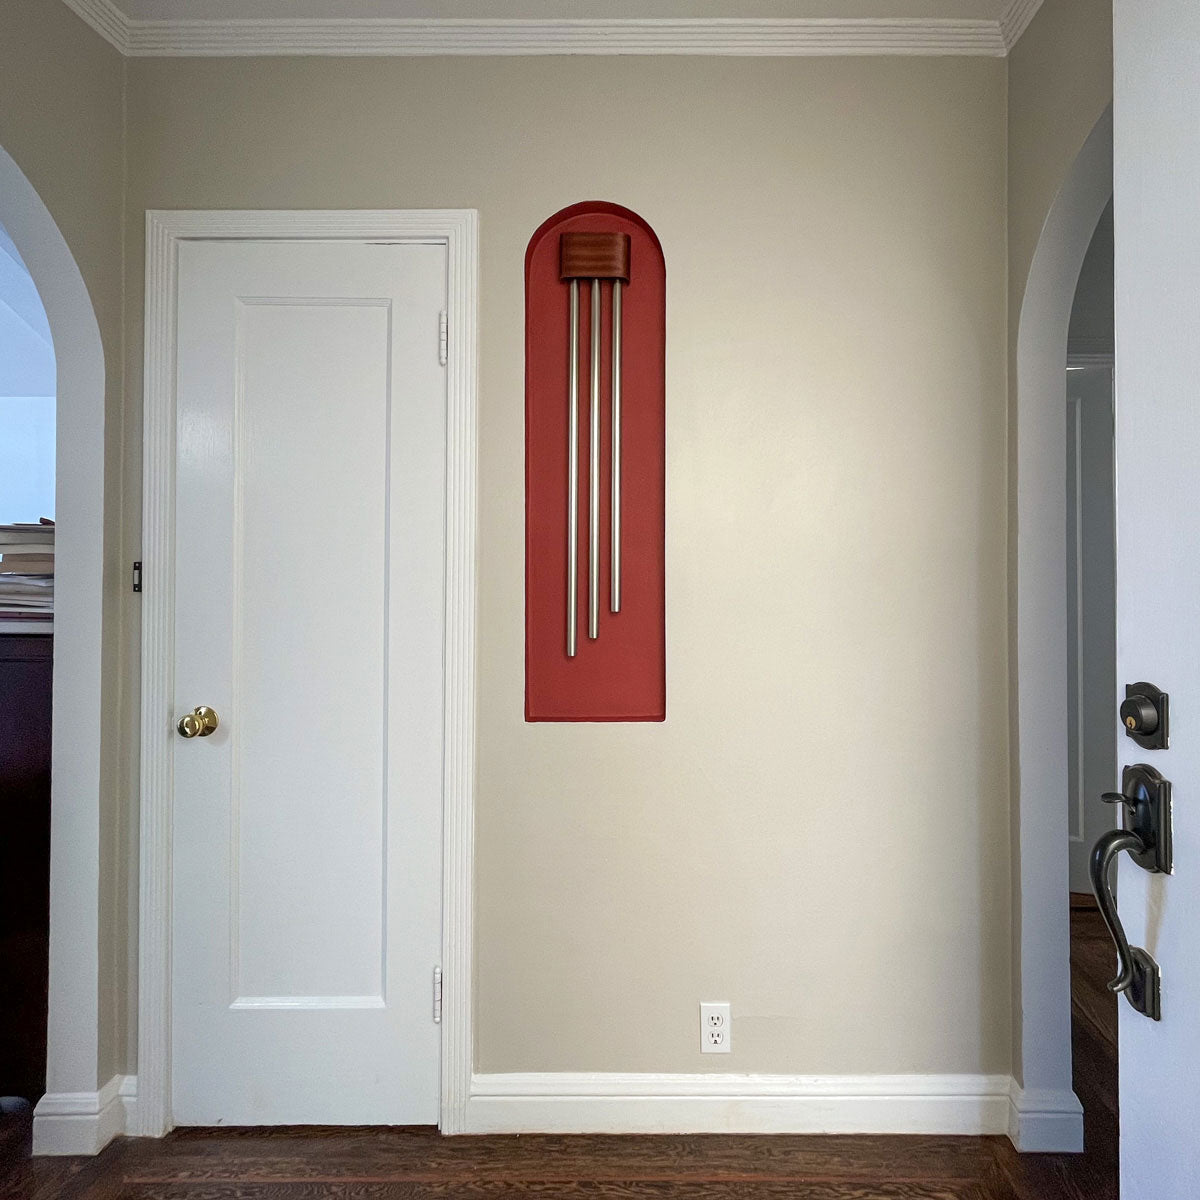 ElectraChime Ribbon tubular door chime with three Nickel Plated Brass Bells in San Francisco, California